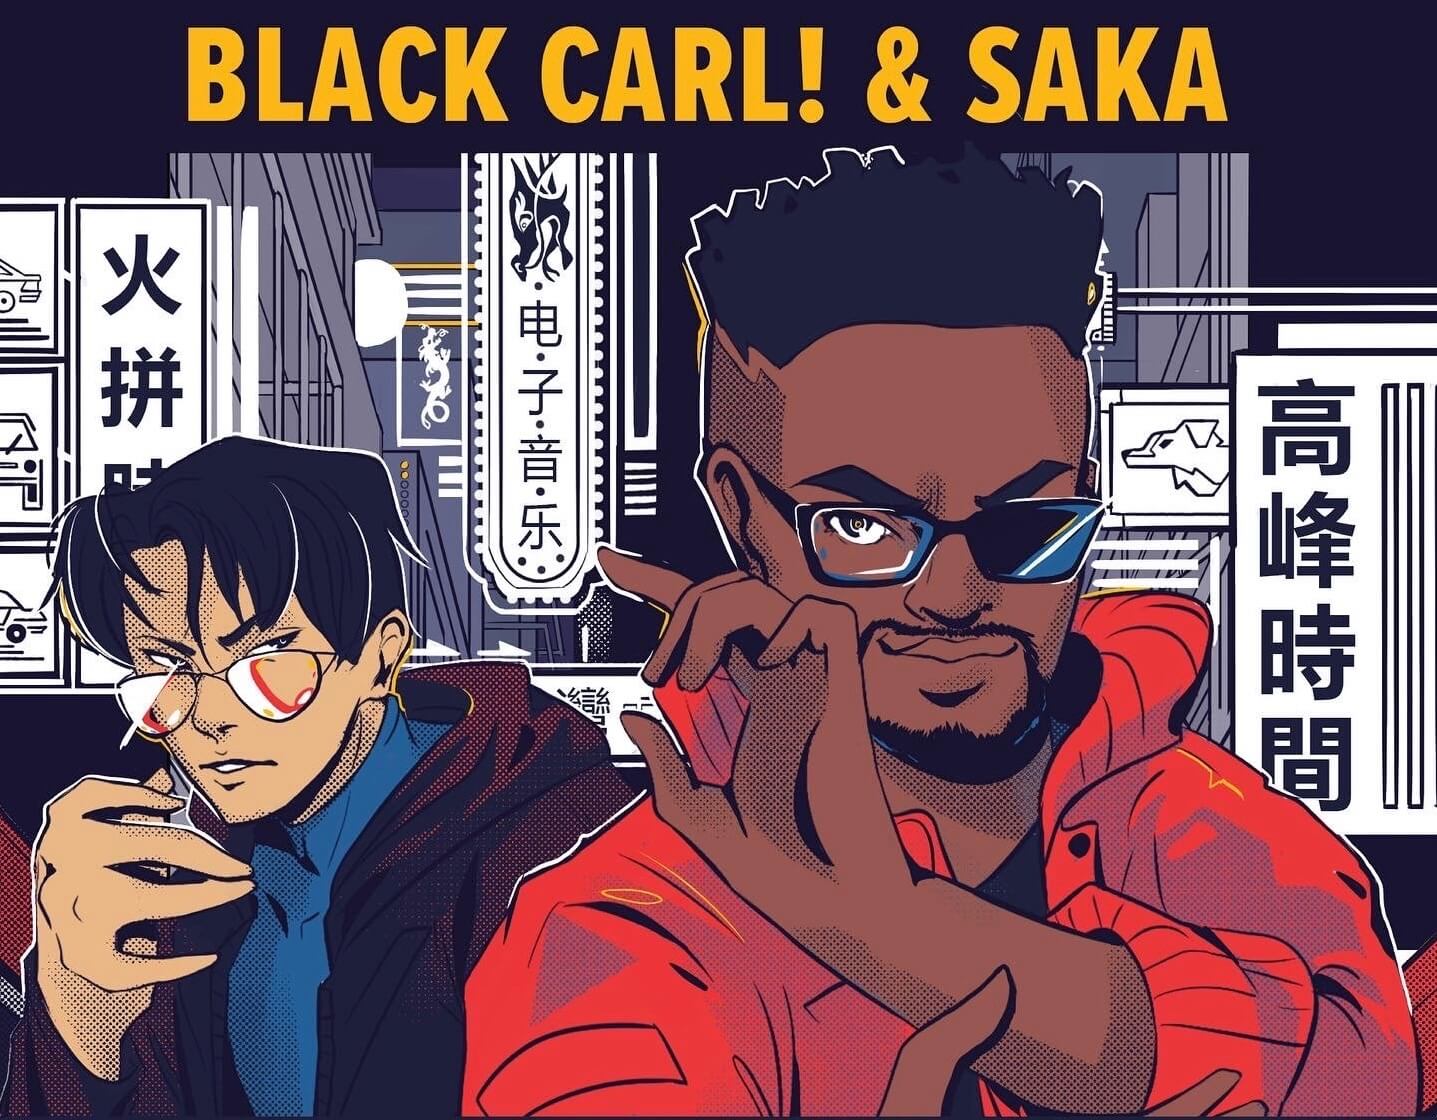 Black Carl! And Saka Join Forces On the Colorful ‘Rush Hour’ EP